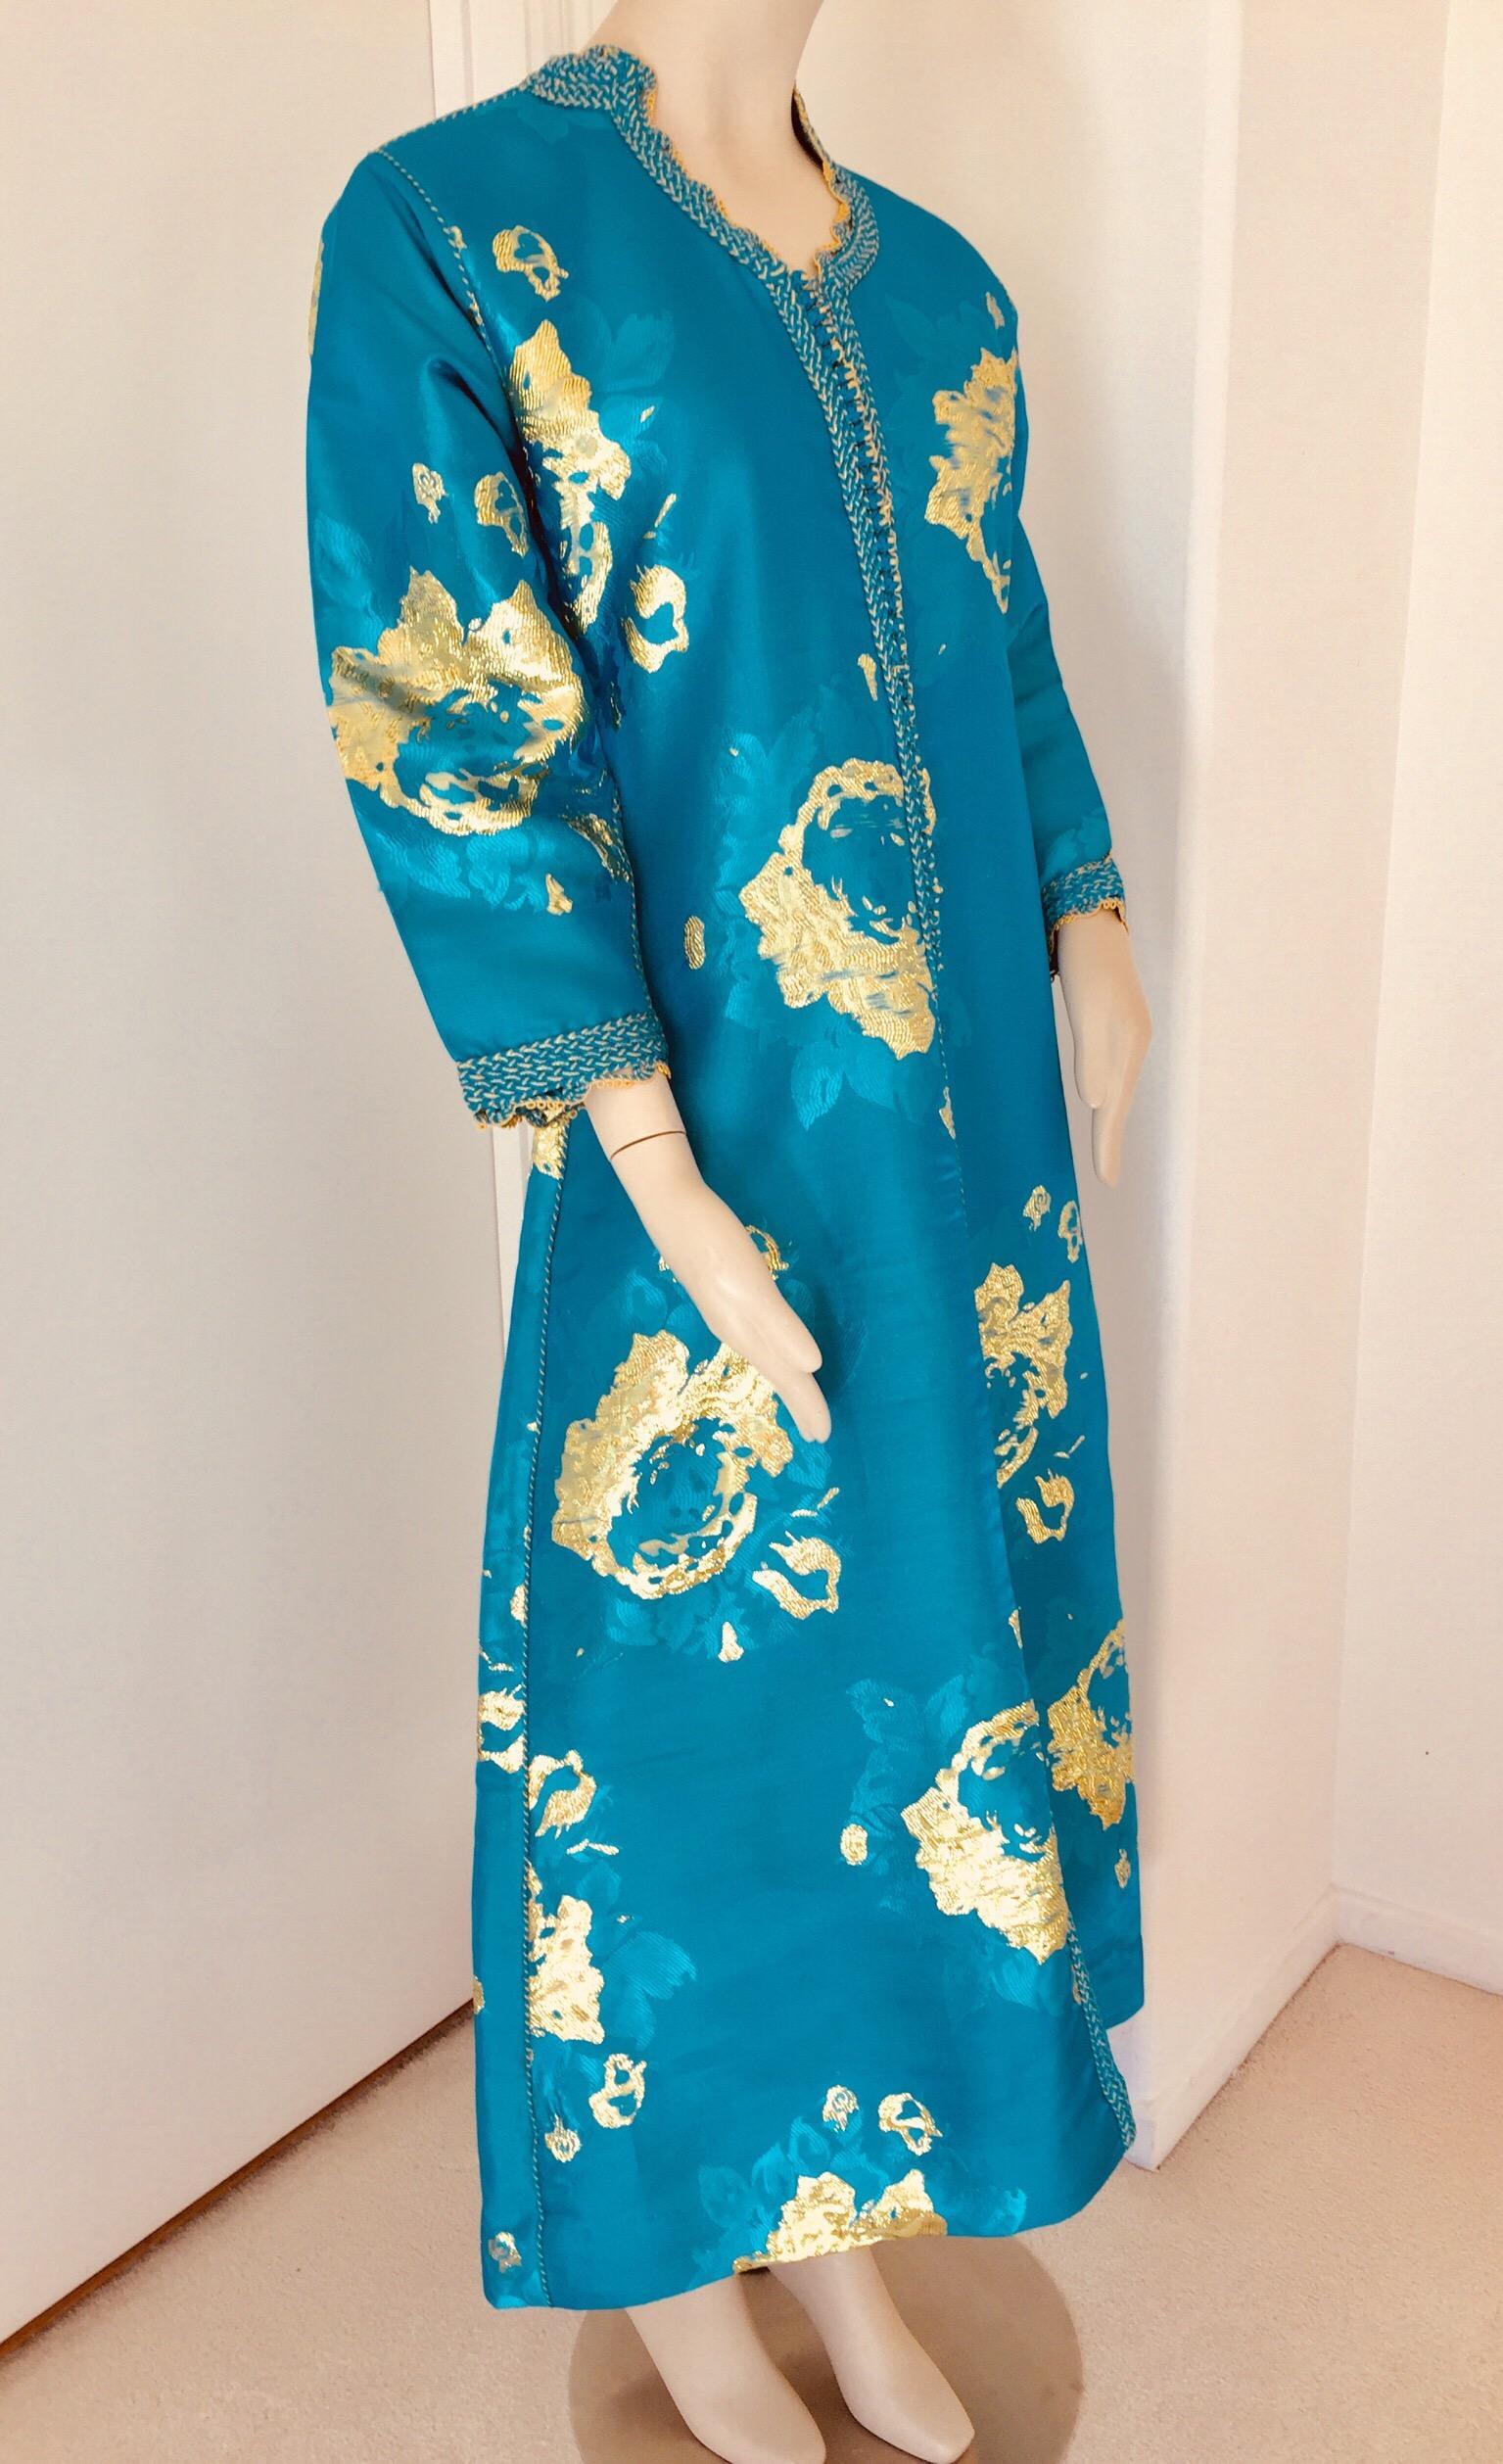 Blue Moroccan Kaftan in Turquoise and Gold Floral Brocade Metallic Lame